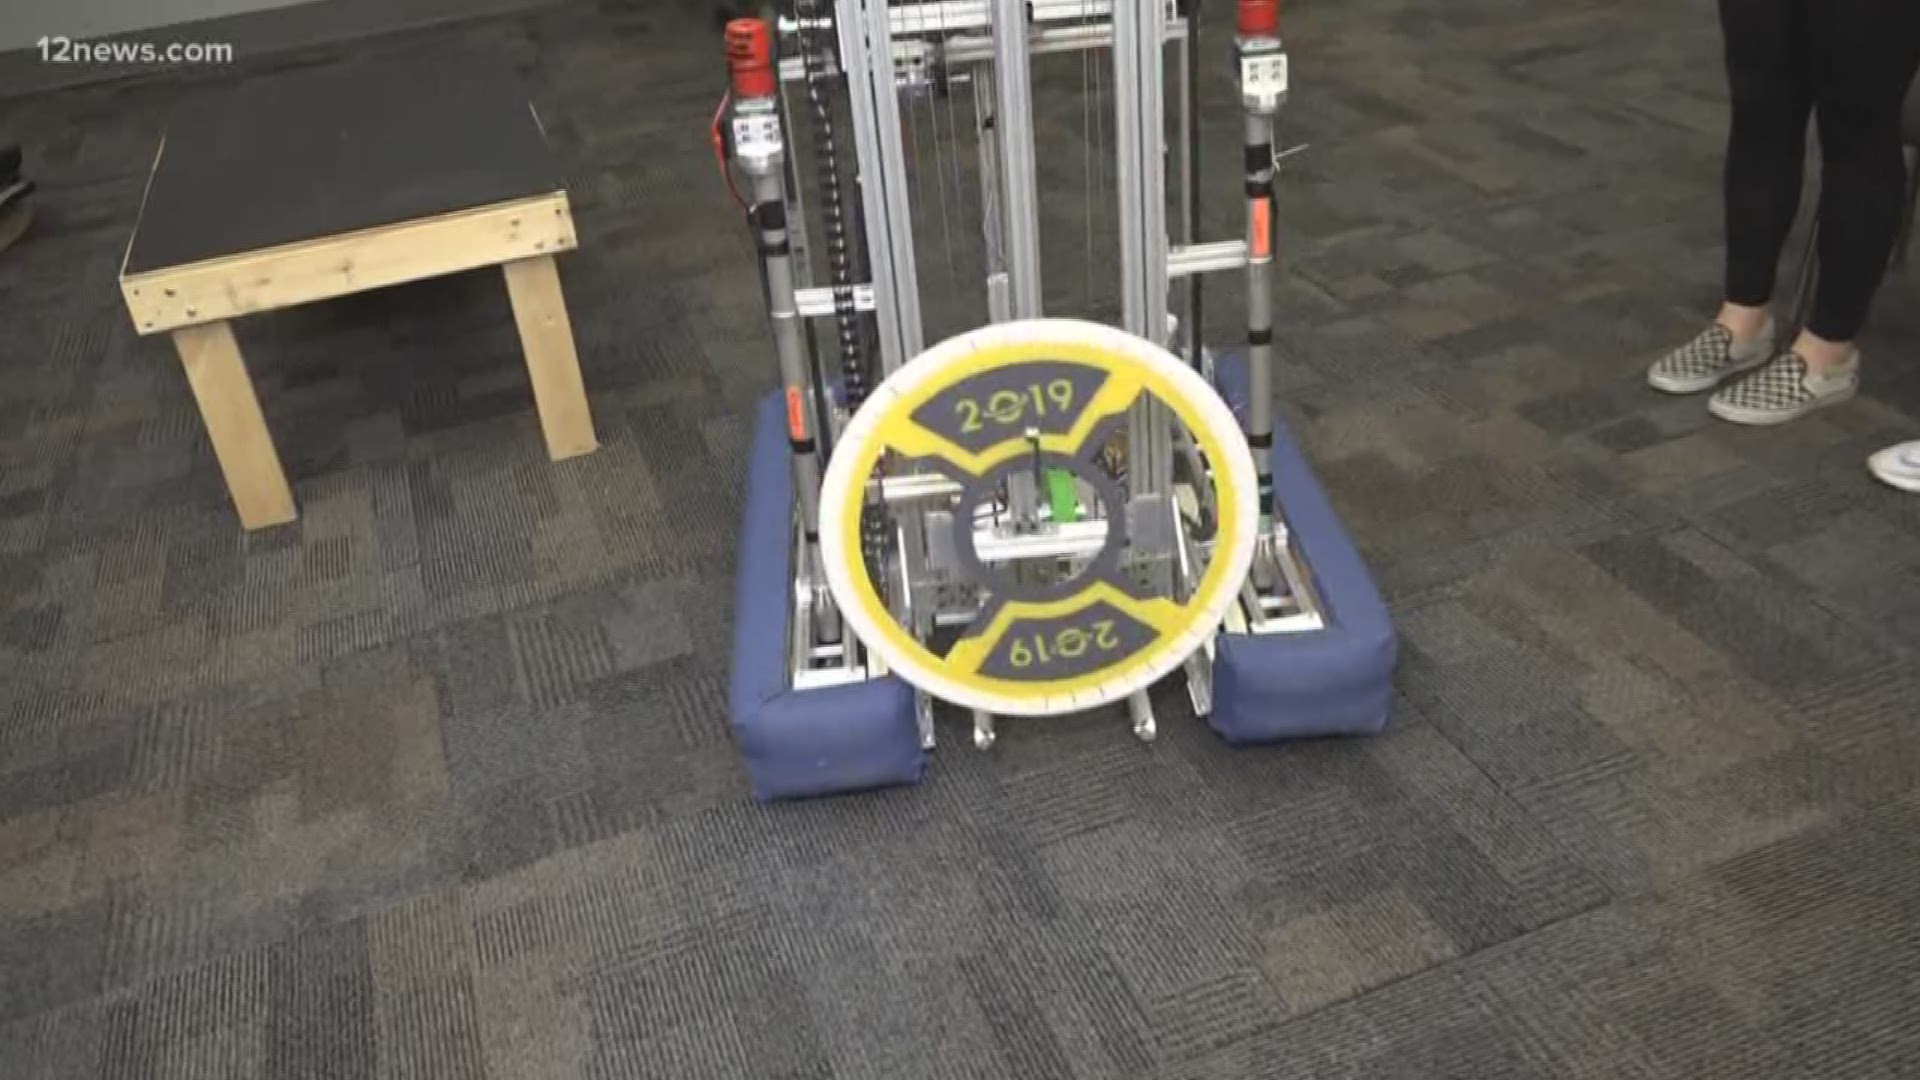 More than 40 teams from across the west will be competing in a three-day robotics competition at Grand Canyon University this weekend. One team from the Valley is dedicating their entry into the competition to Salt River police Officer Clayton Townsend who was hit and killed by a man who was texting and driving.